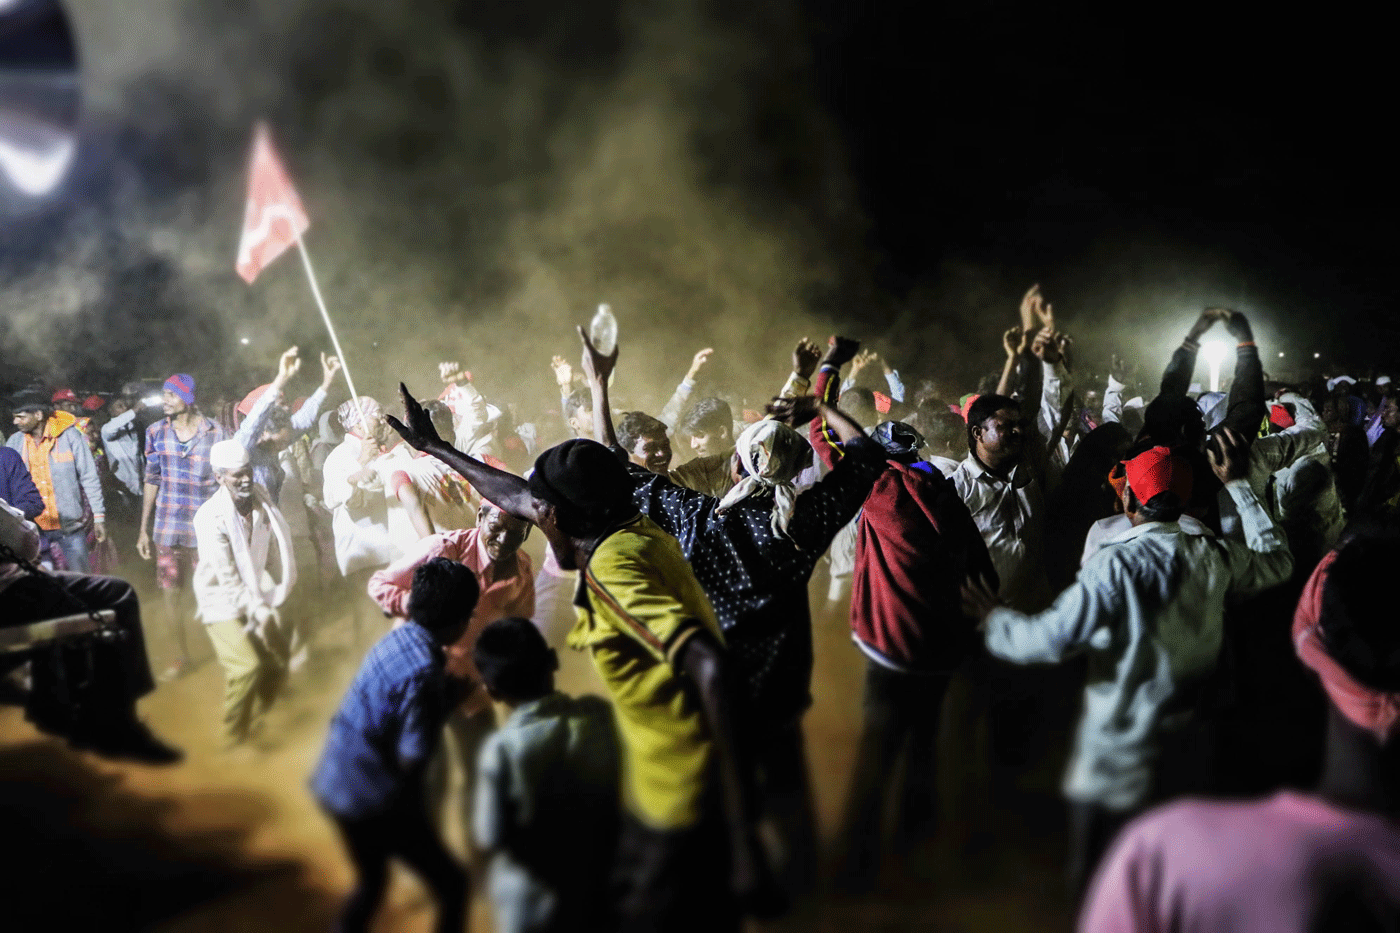 Farmers dancing and singing while awaiting the outcome of the meeting between representatives of the government of Maharashtra and All India Kisan Sabha leaders